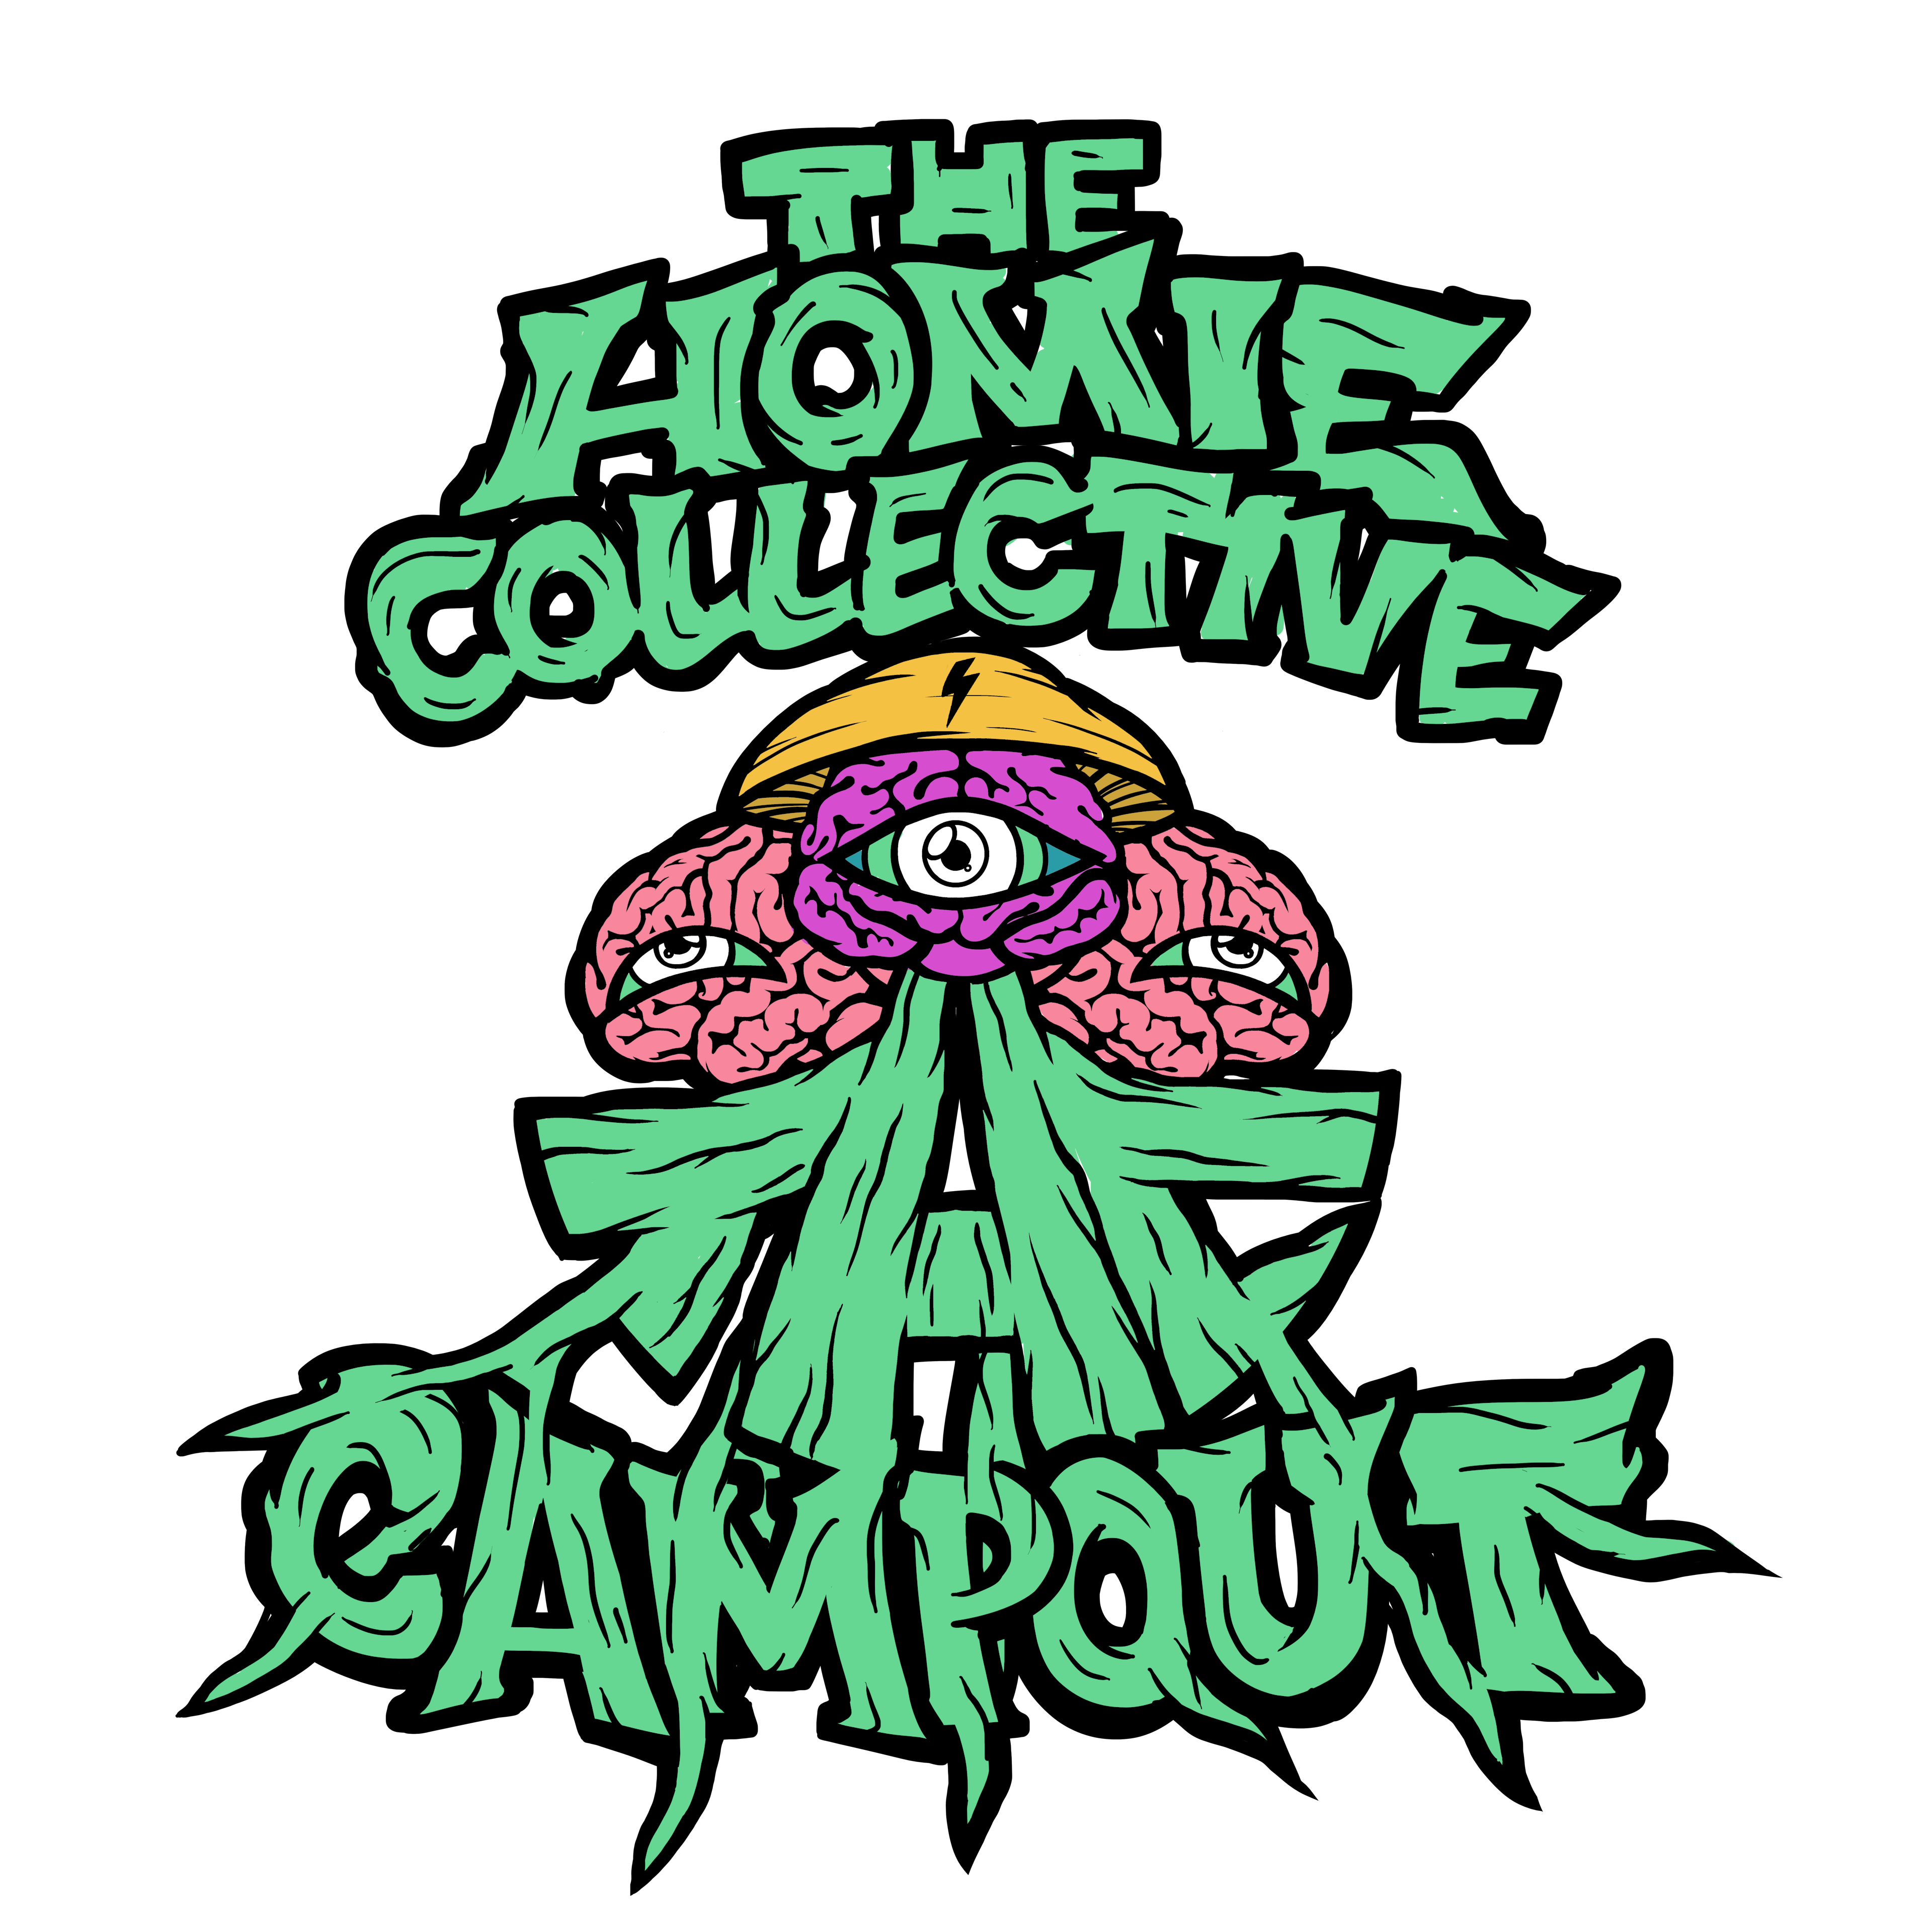 The Homie Collective logo